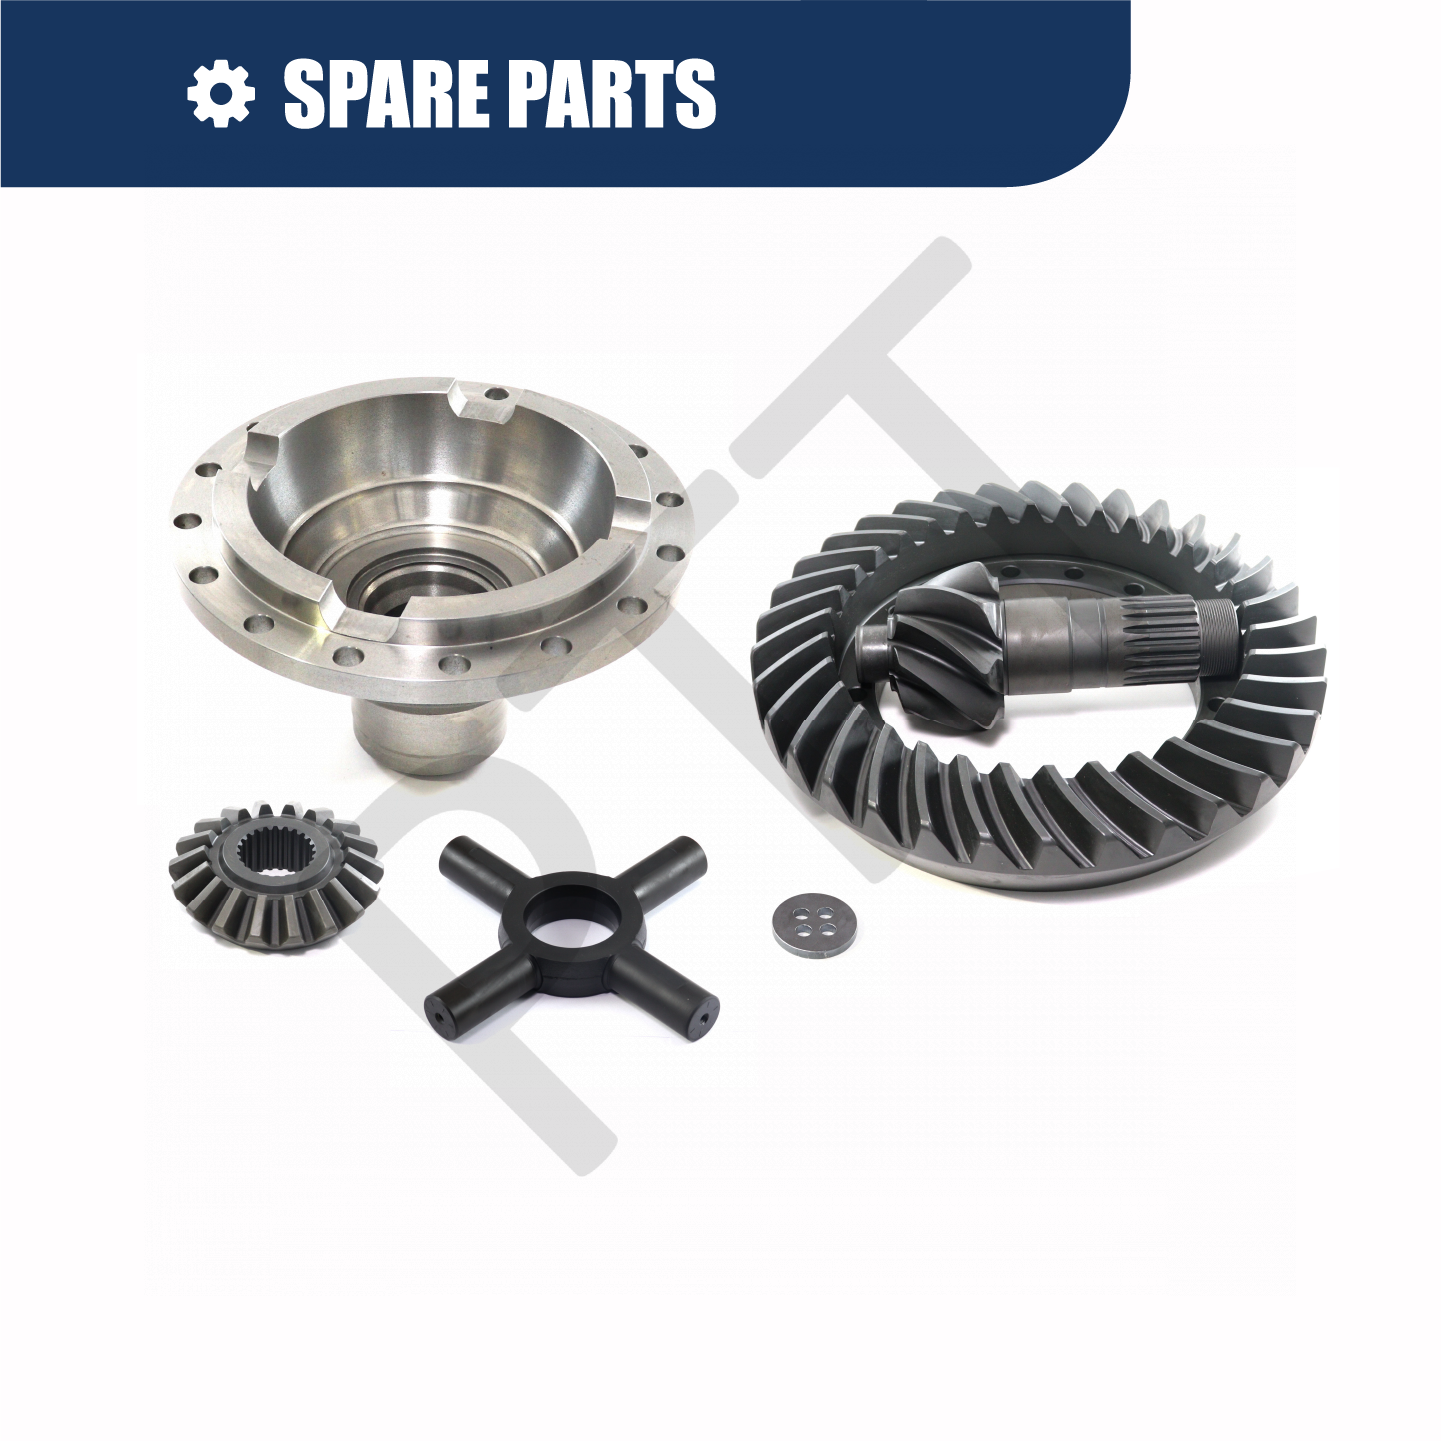 SPARE PARTS (WITH BANNER)